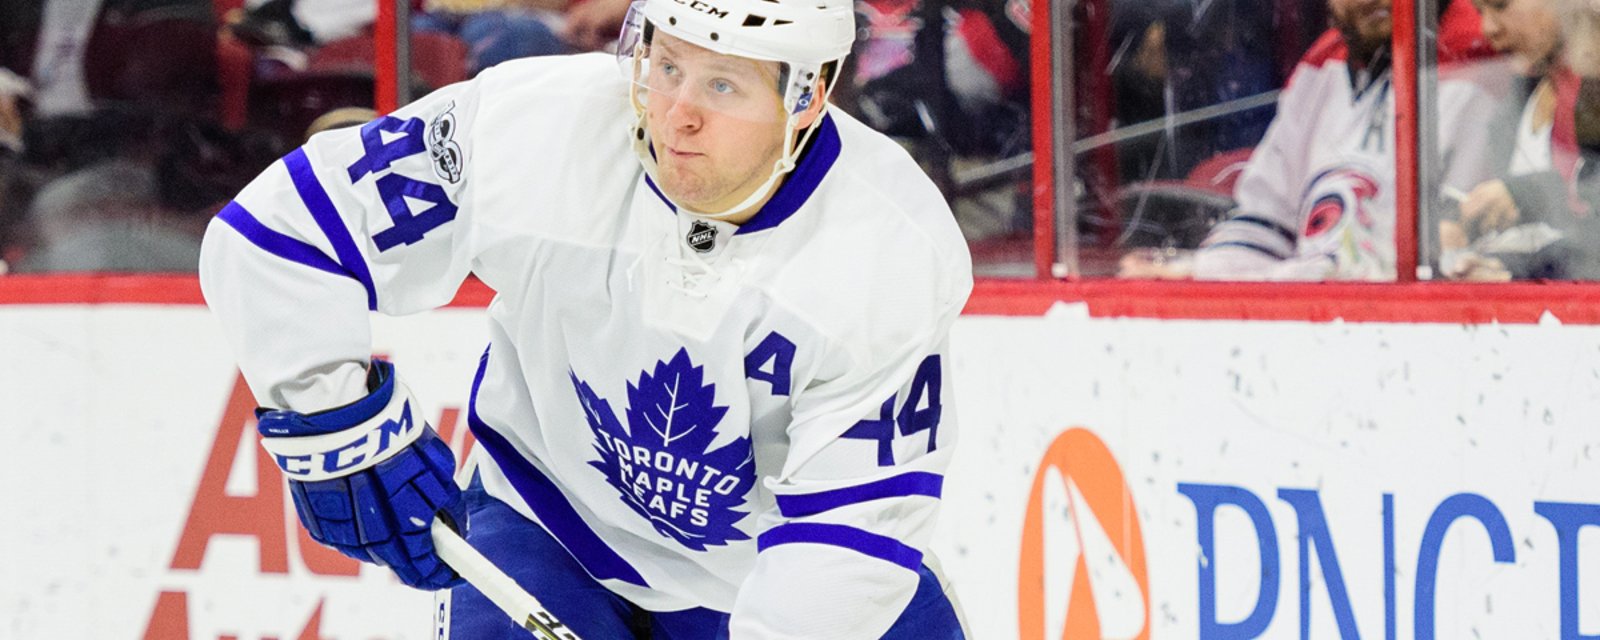 Breaking: Rielly absent from practice